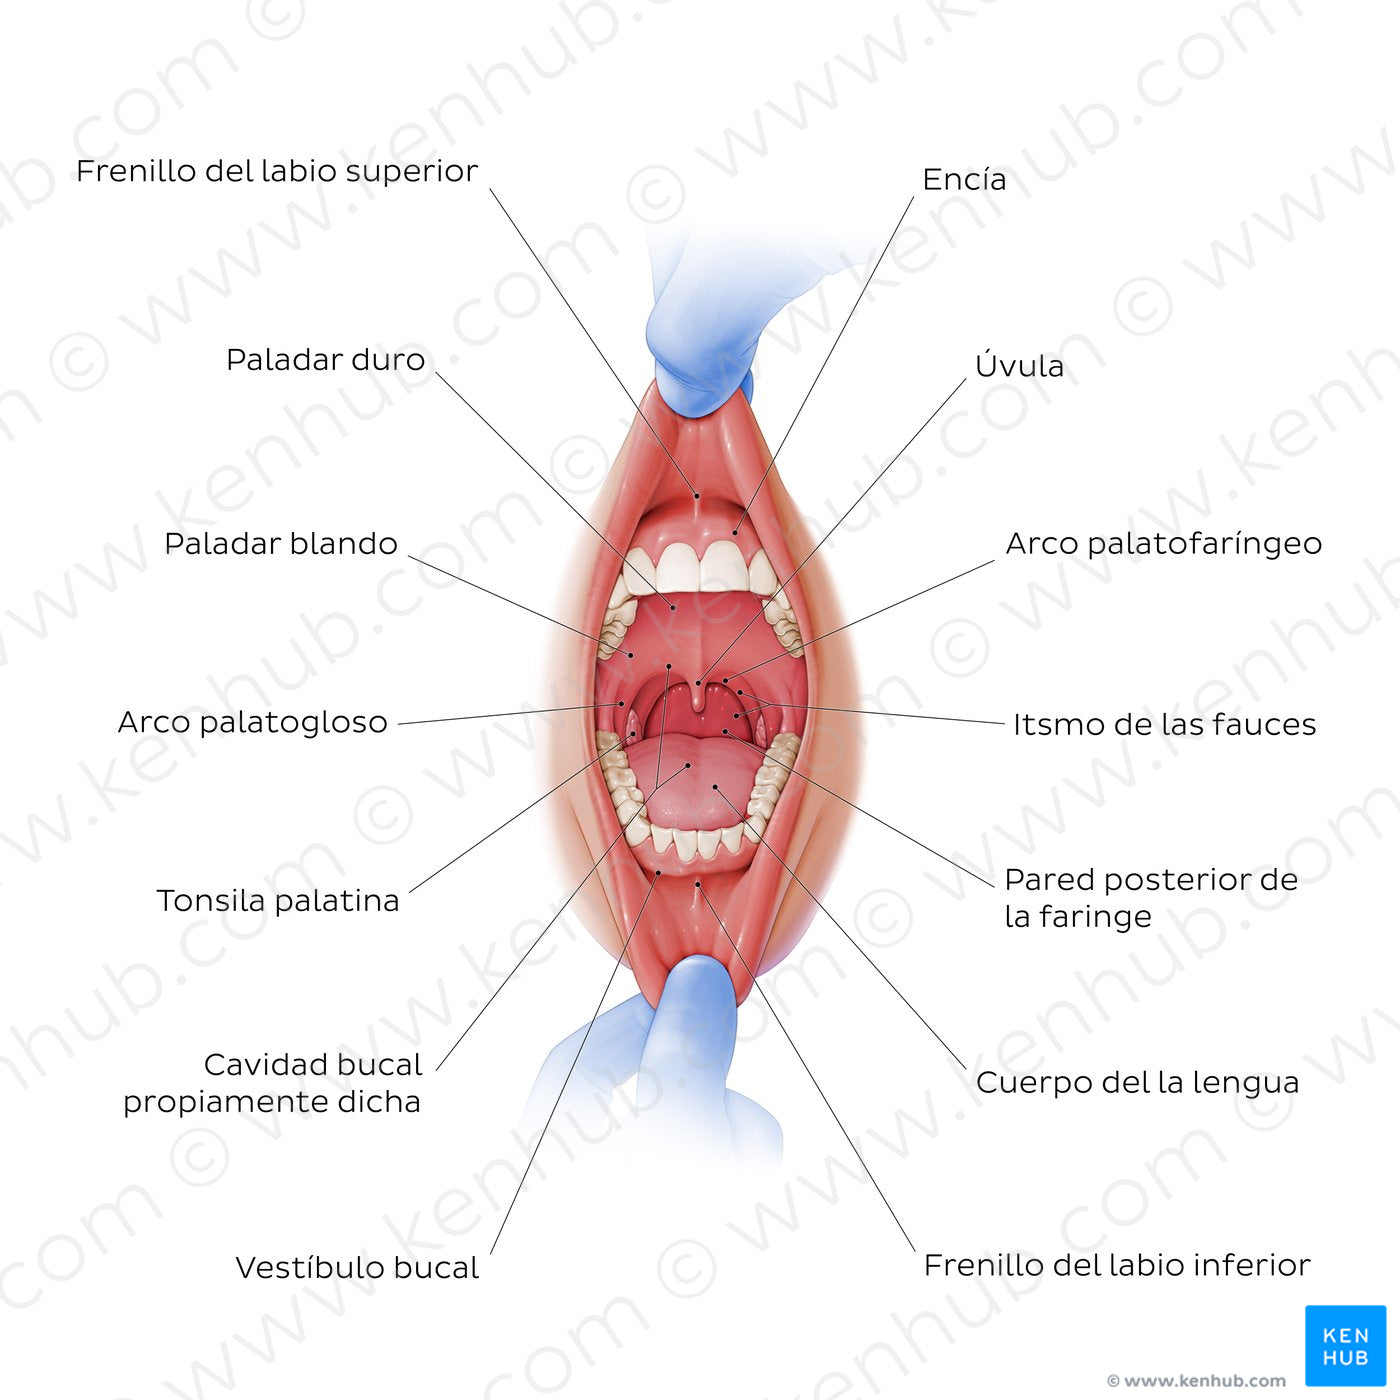 Overview of the oral cavity (Spanish)